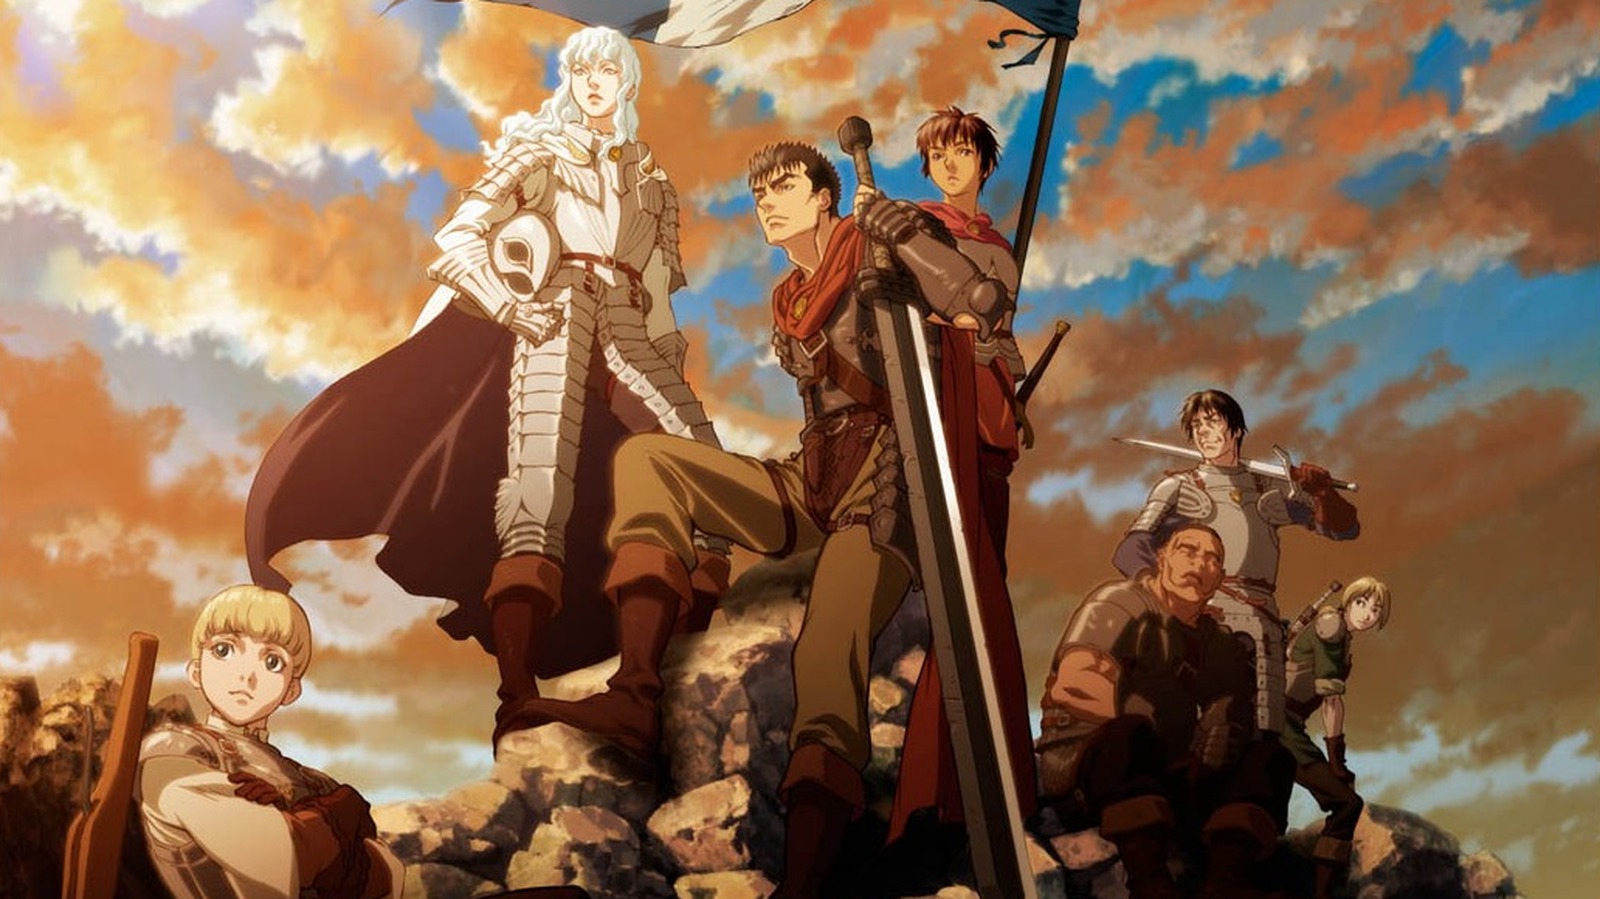 SciFi Japan - BERSERK: THE GOLDEN AGE ARC Movie 2 Premieres in Double  Feature Event